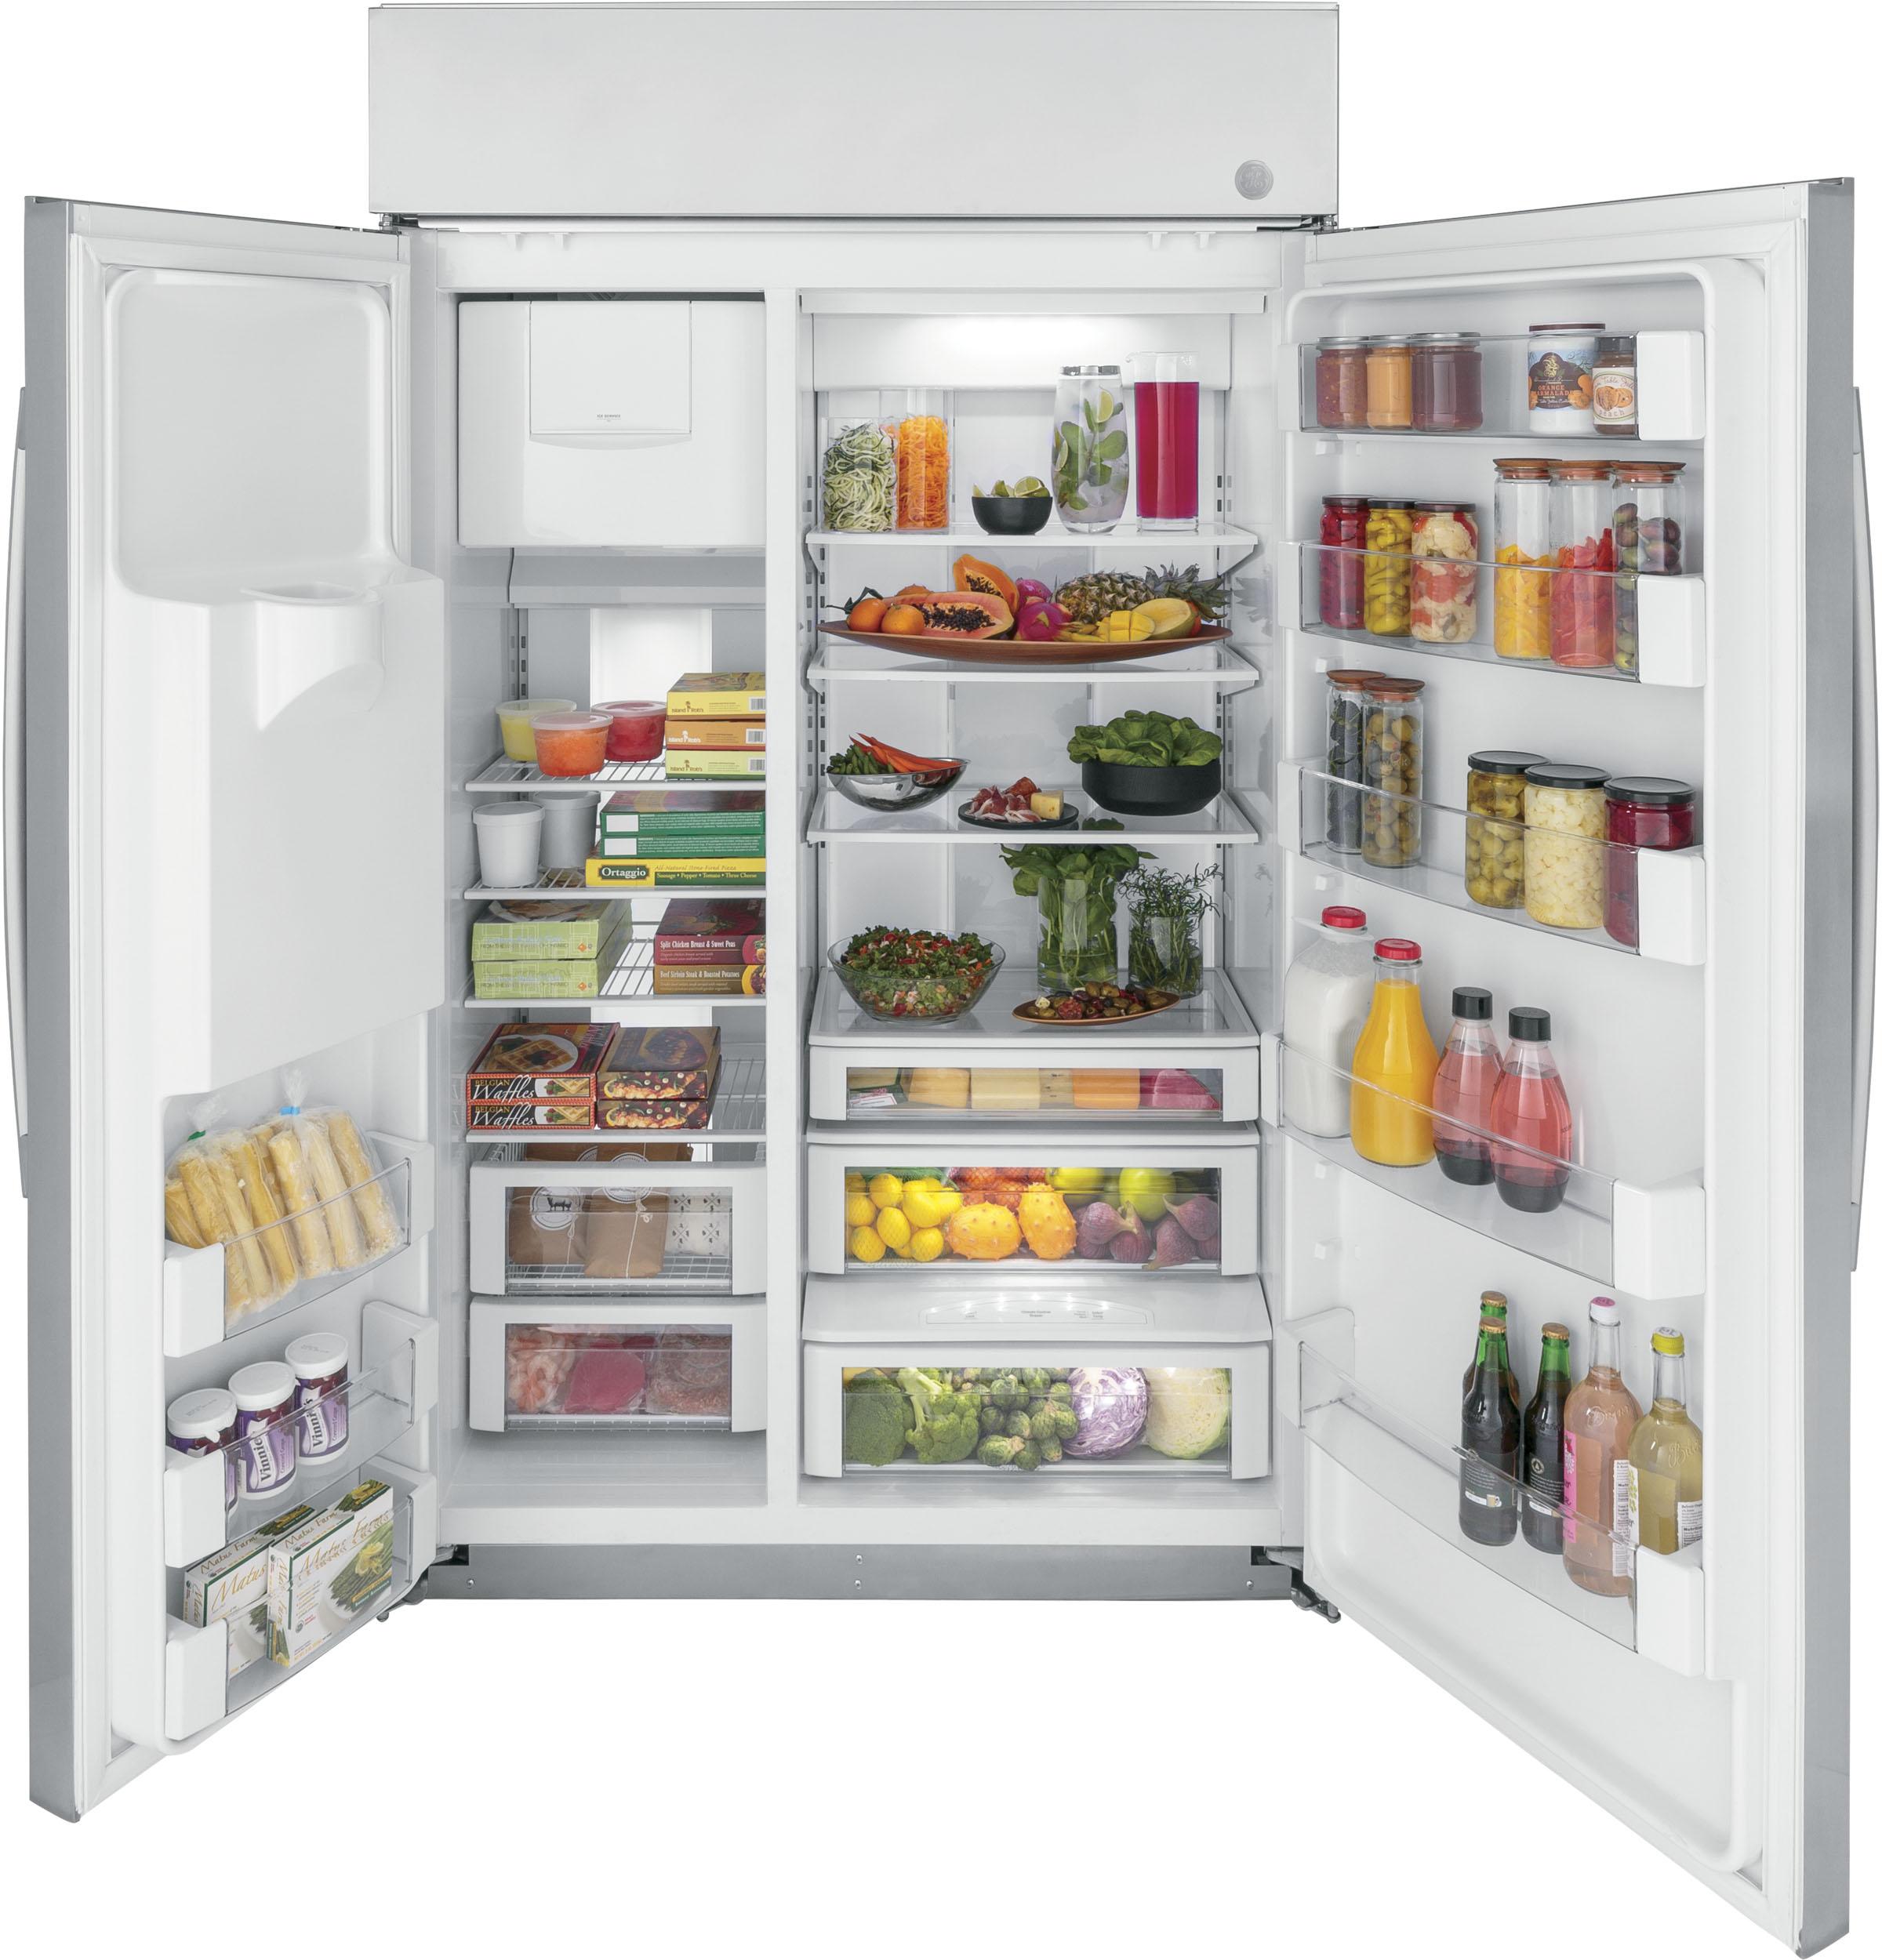 GE Profile™ Series 48" Smart Built-In Side-by-Side Refrigerator with Dispenser